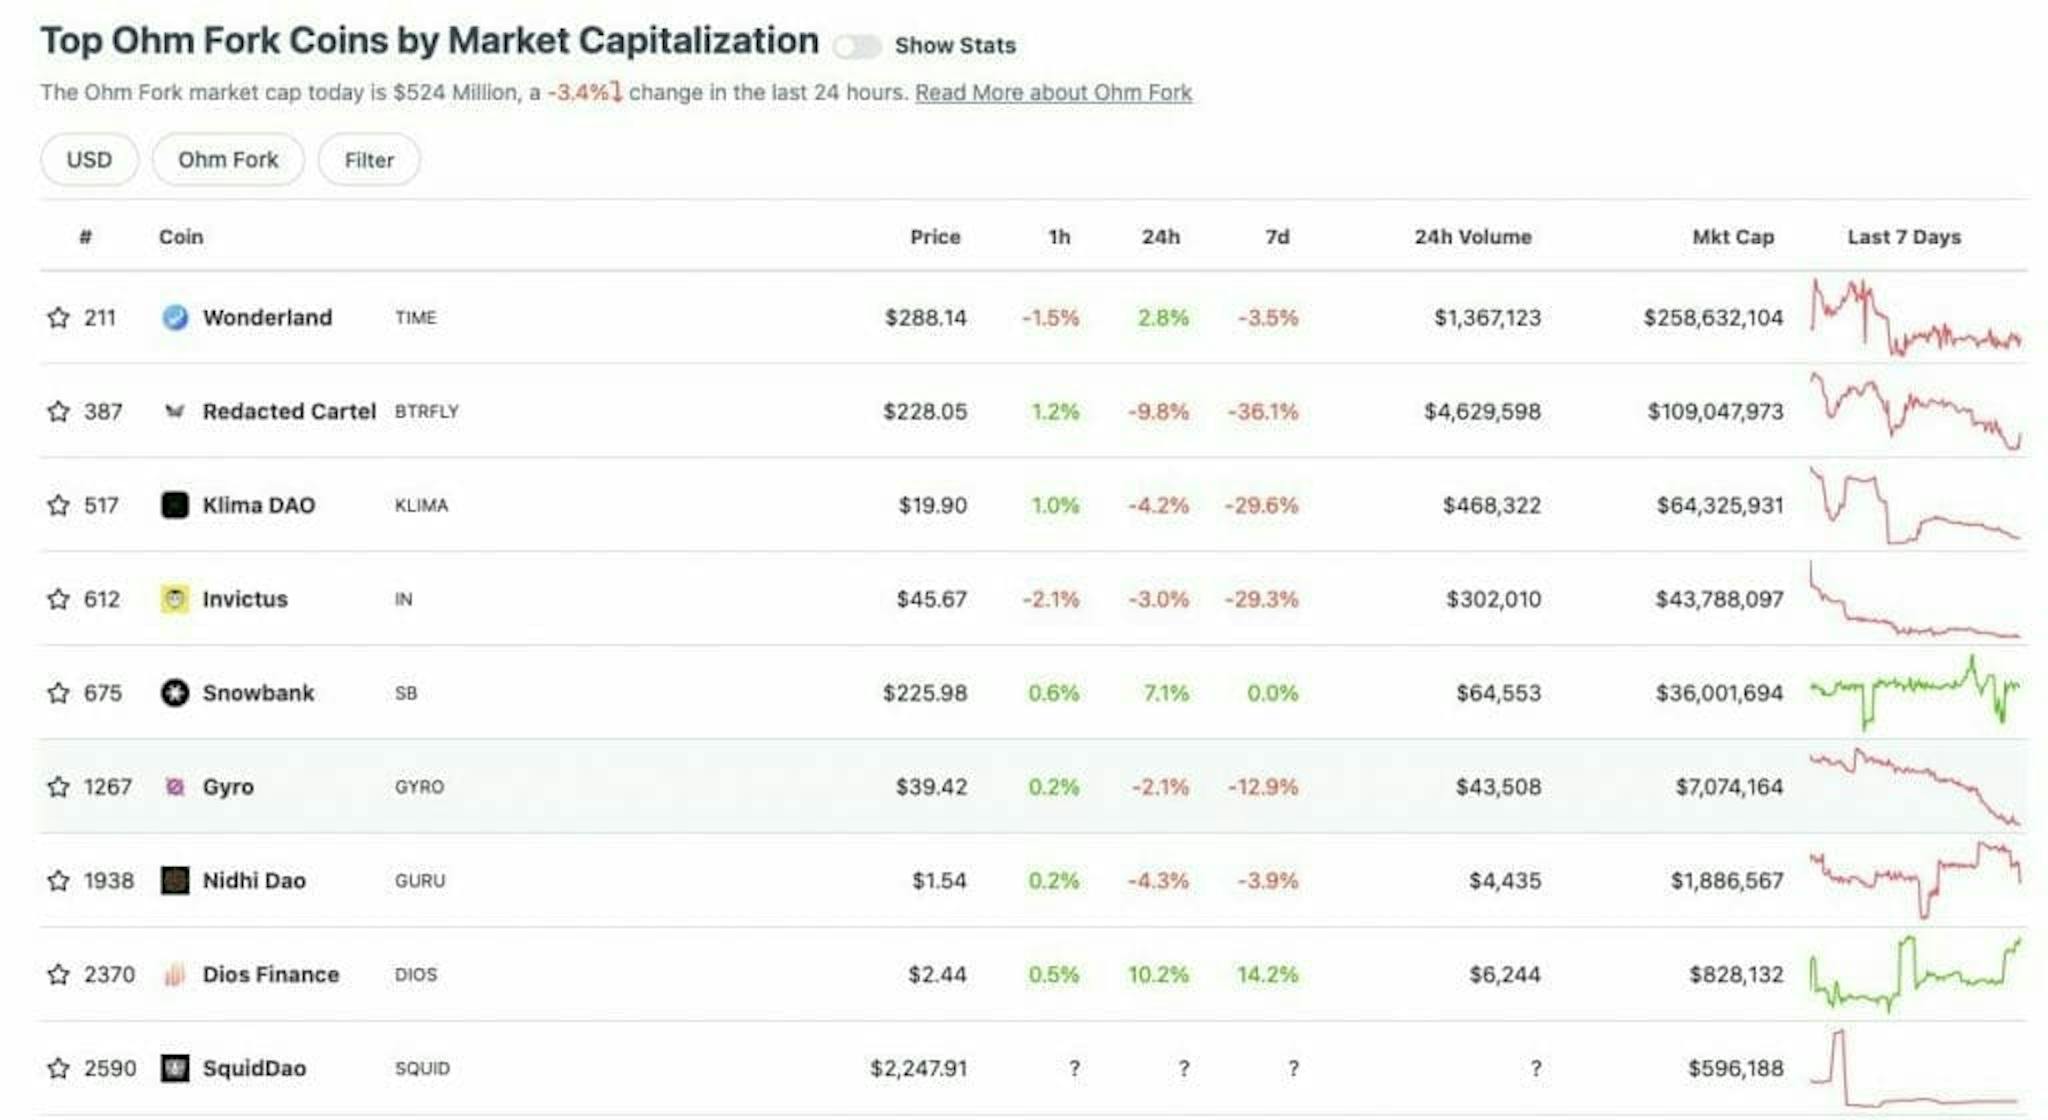 Table showing the top 9 OHM forks by market cap